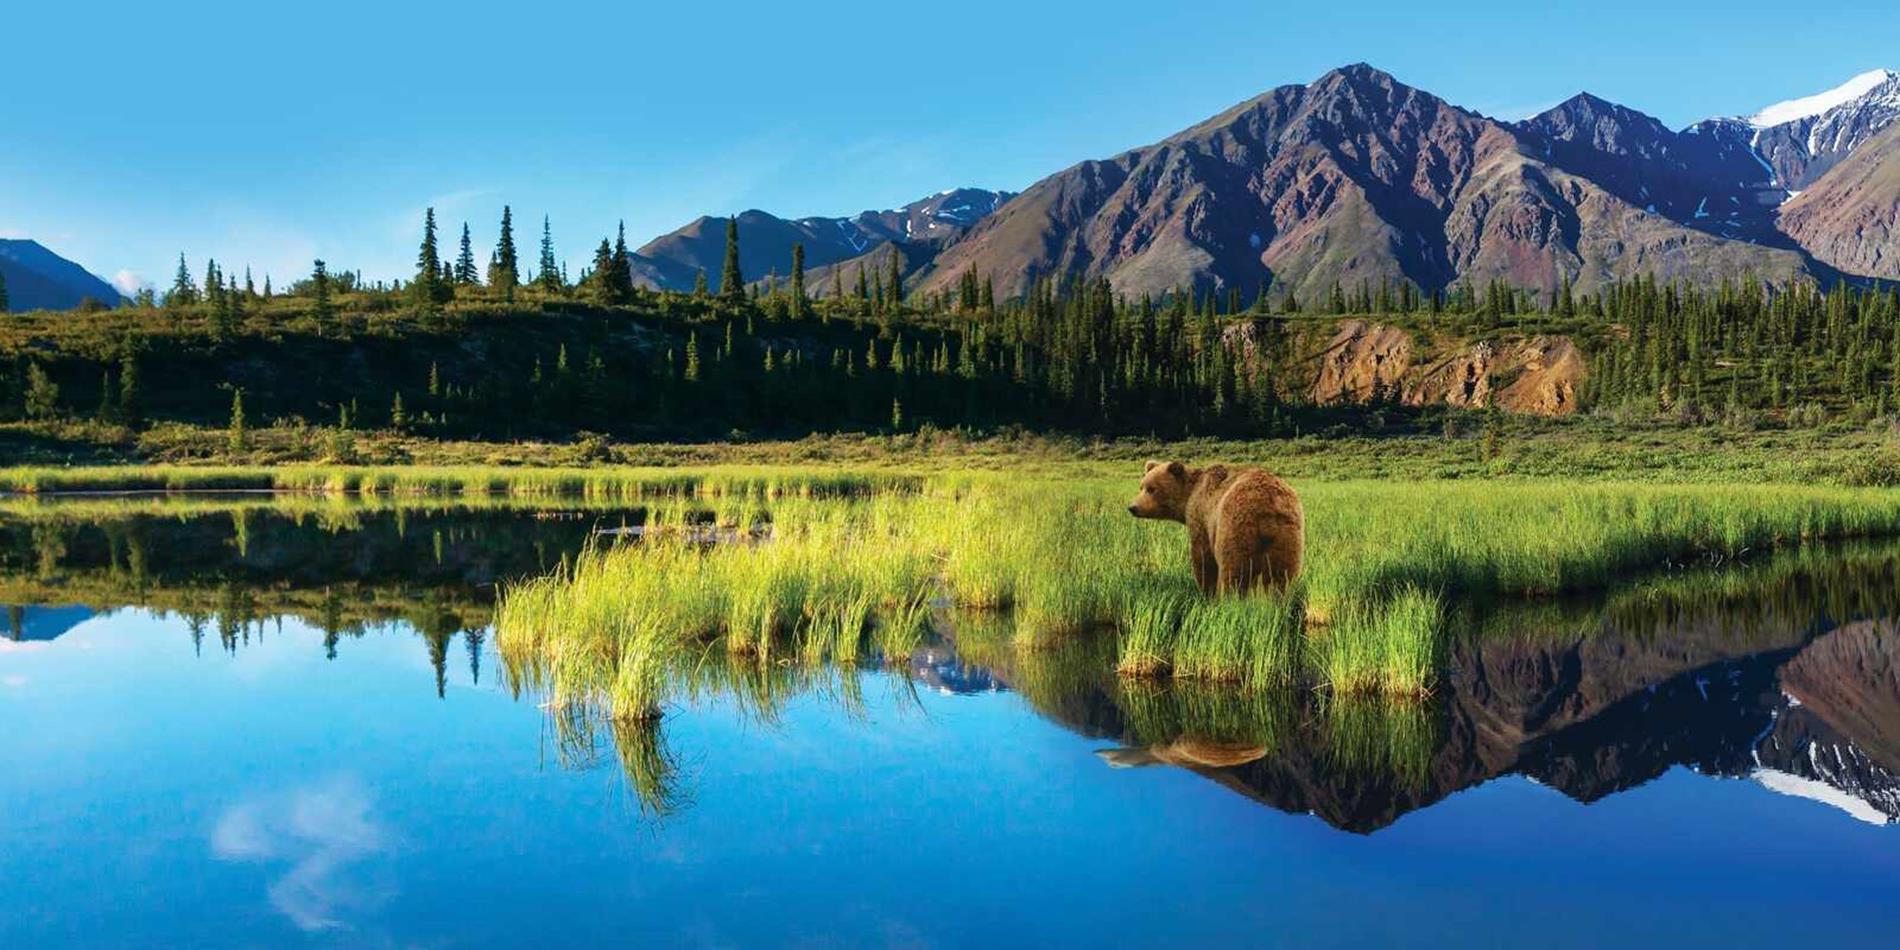 brown bear facing away standing on grass at edge of lake, mountains in background